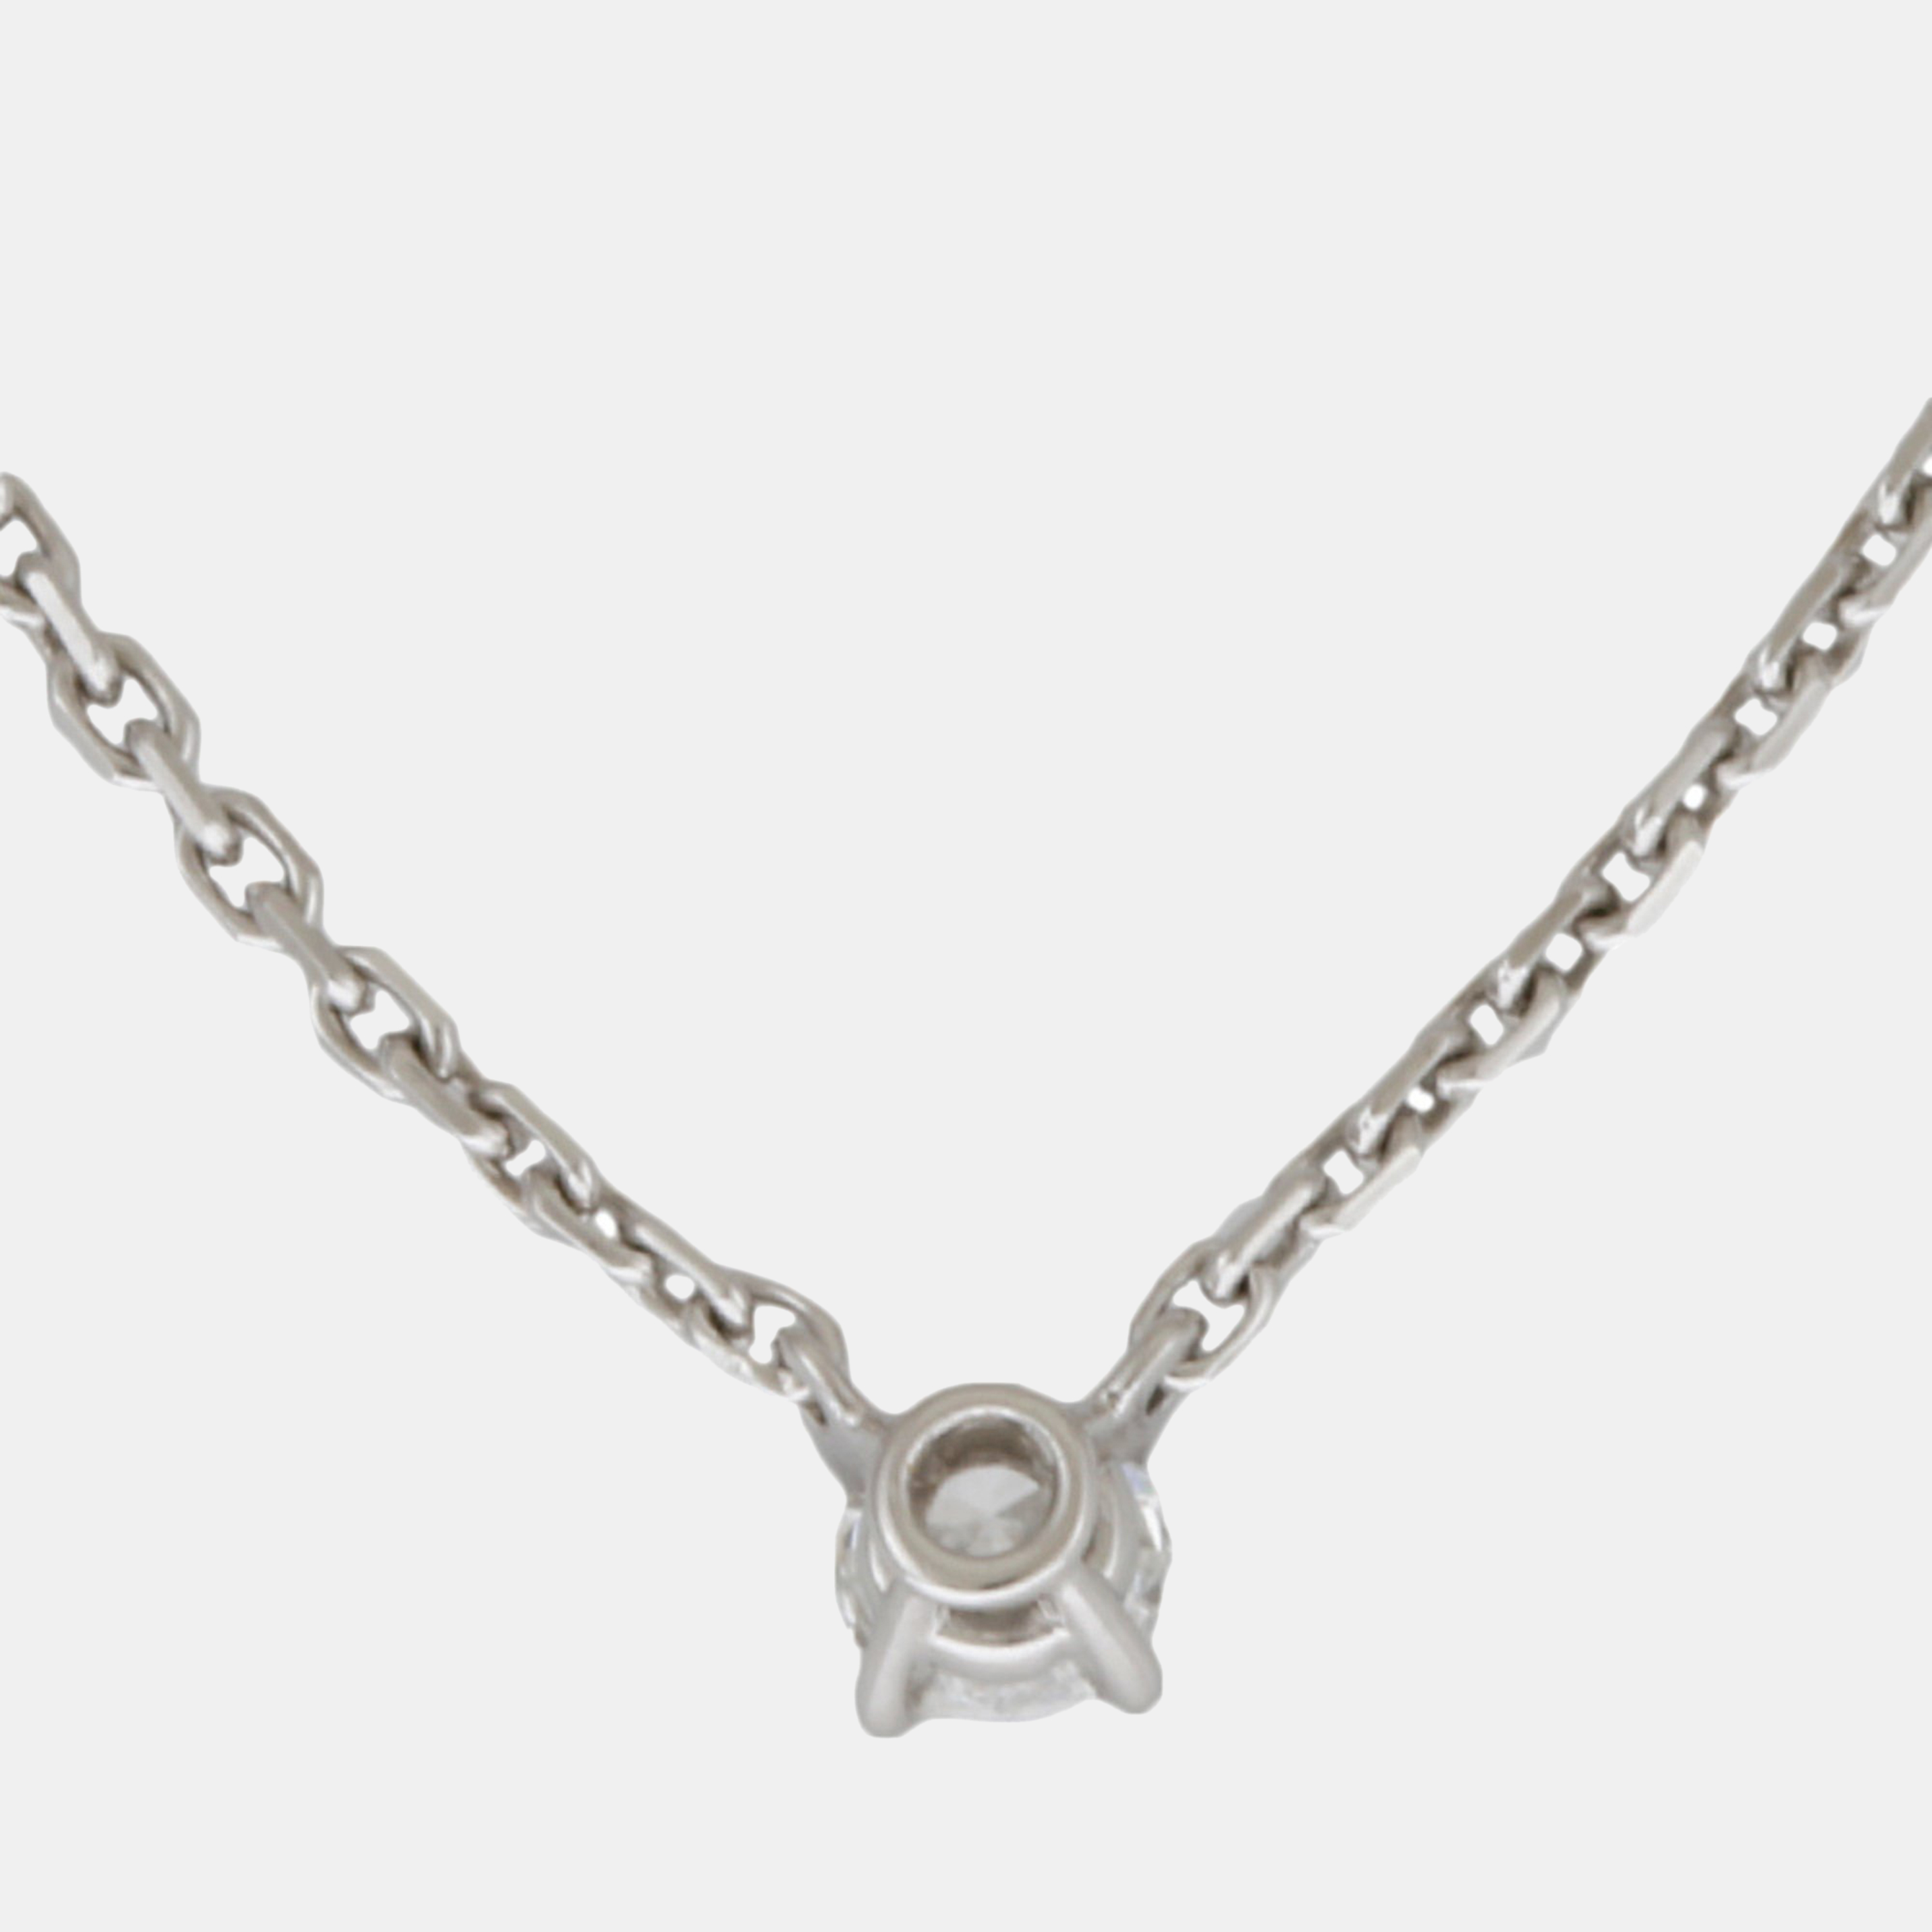 Cartier 18K White Gold And Diamond 1895 Pendant Necklace